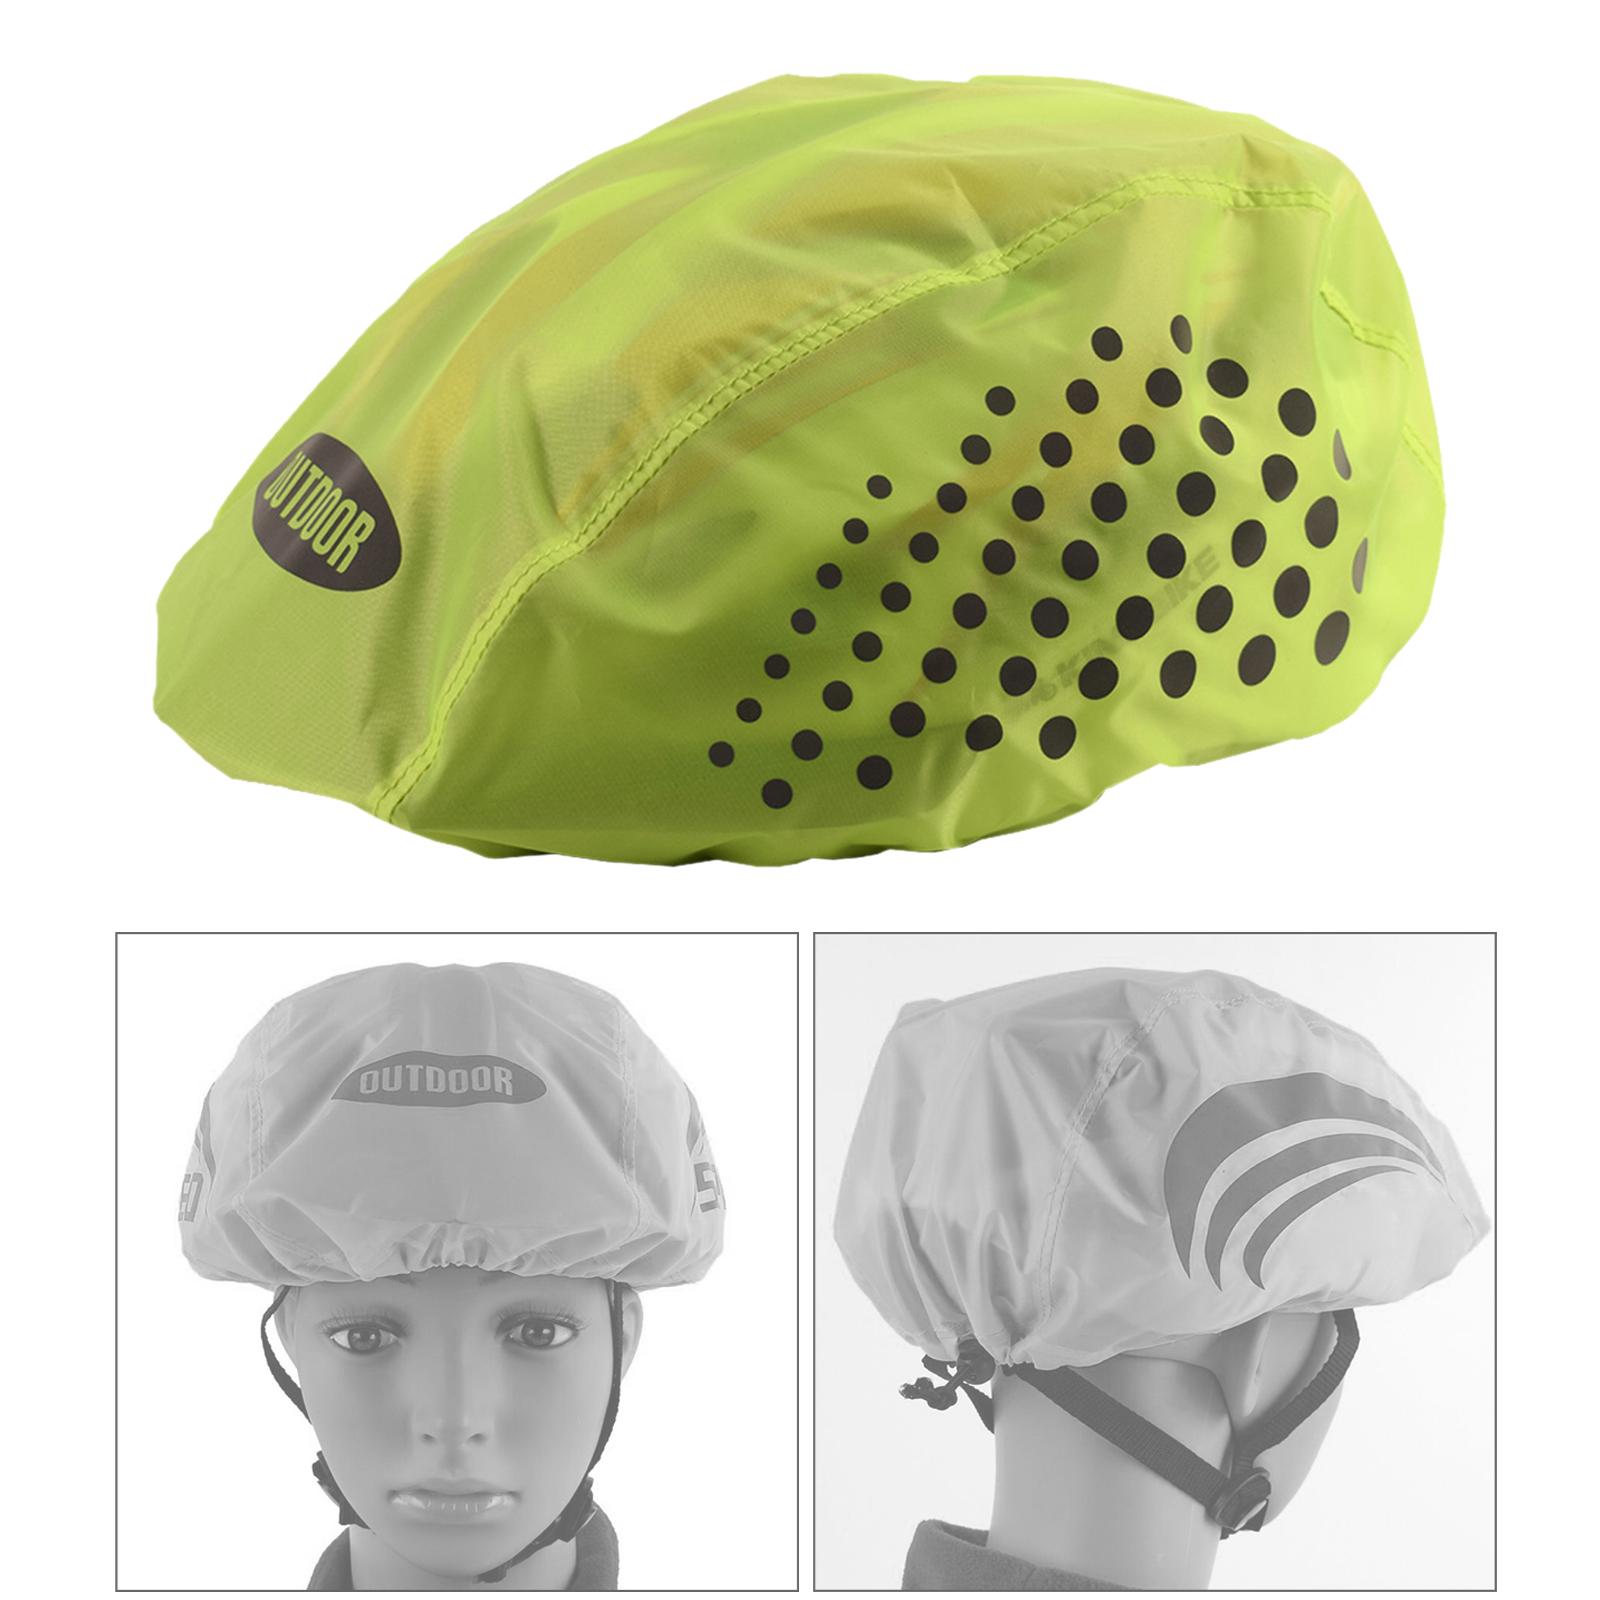 Waterproof Cycling Helmet Cover Reflective Strip Protect Fluorescent Green 2